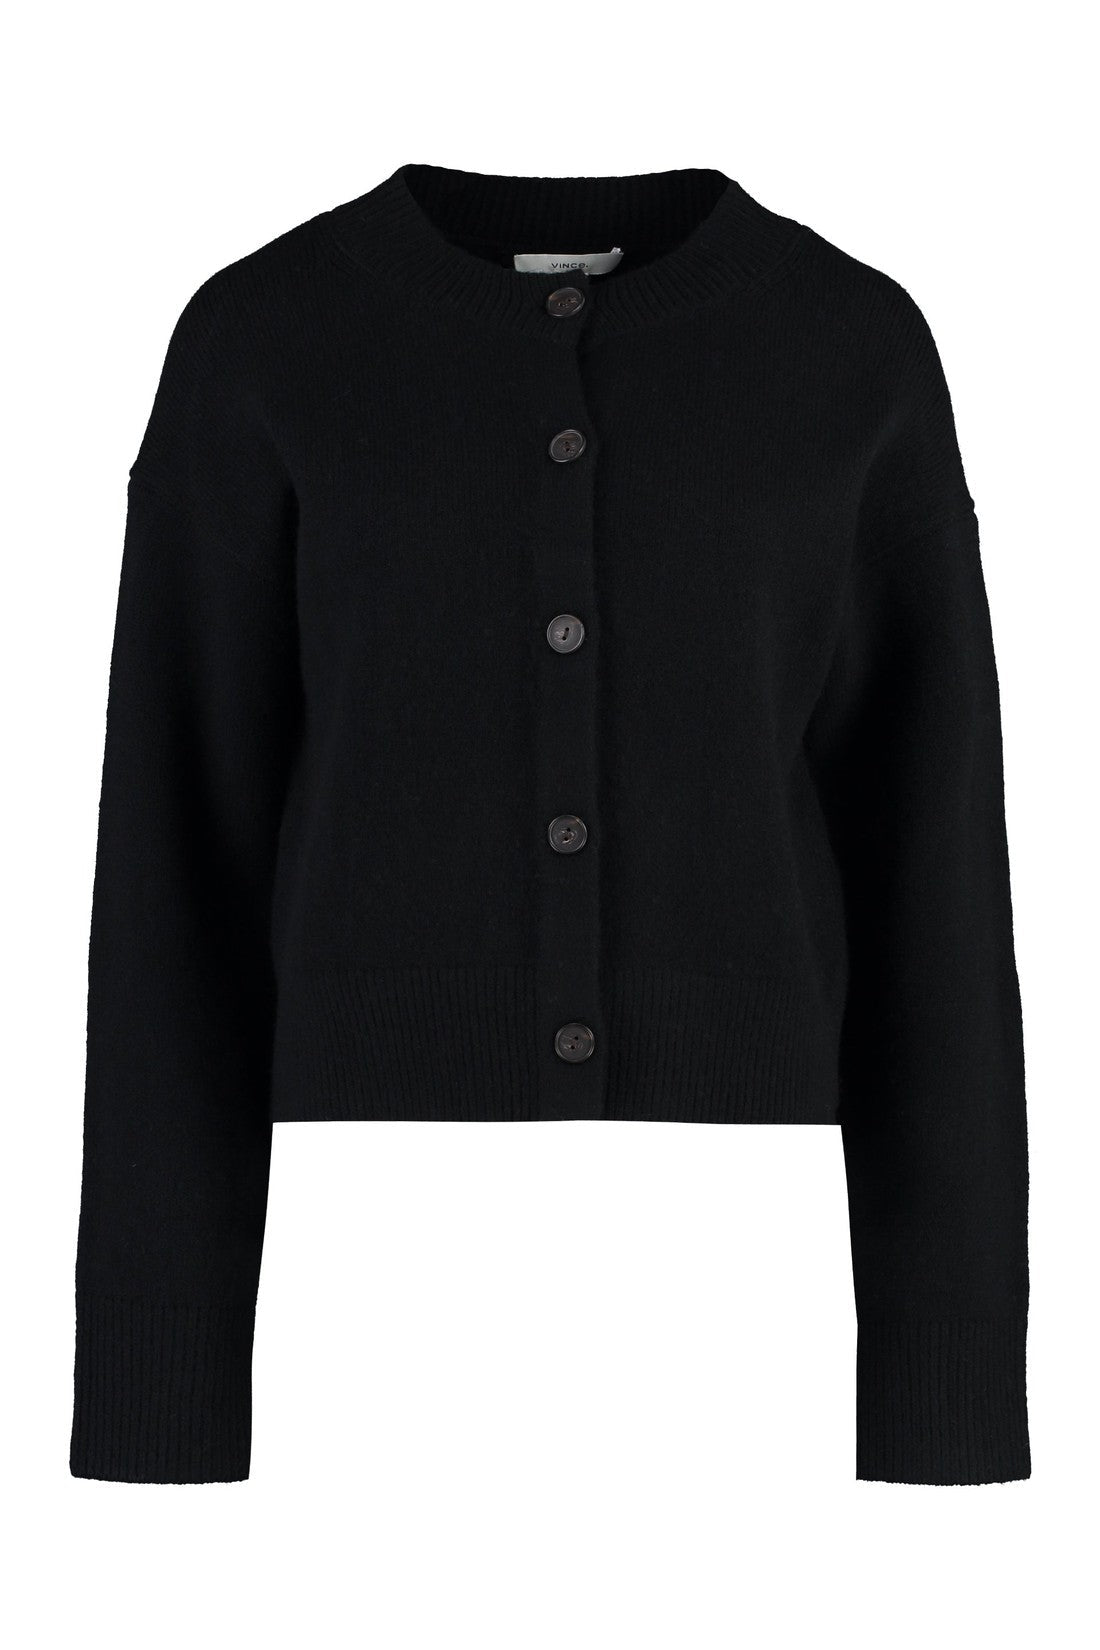 Vince-OUTLET-SALE-Wool and cashmere cardigan-ARCHIVIST